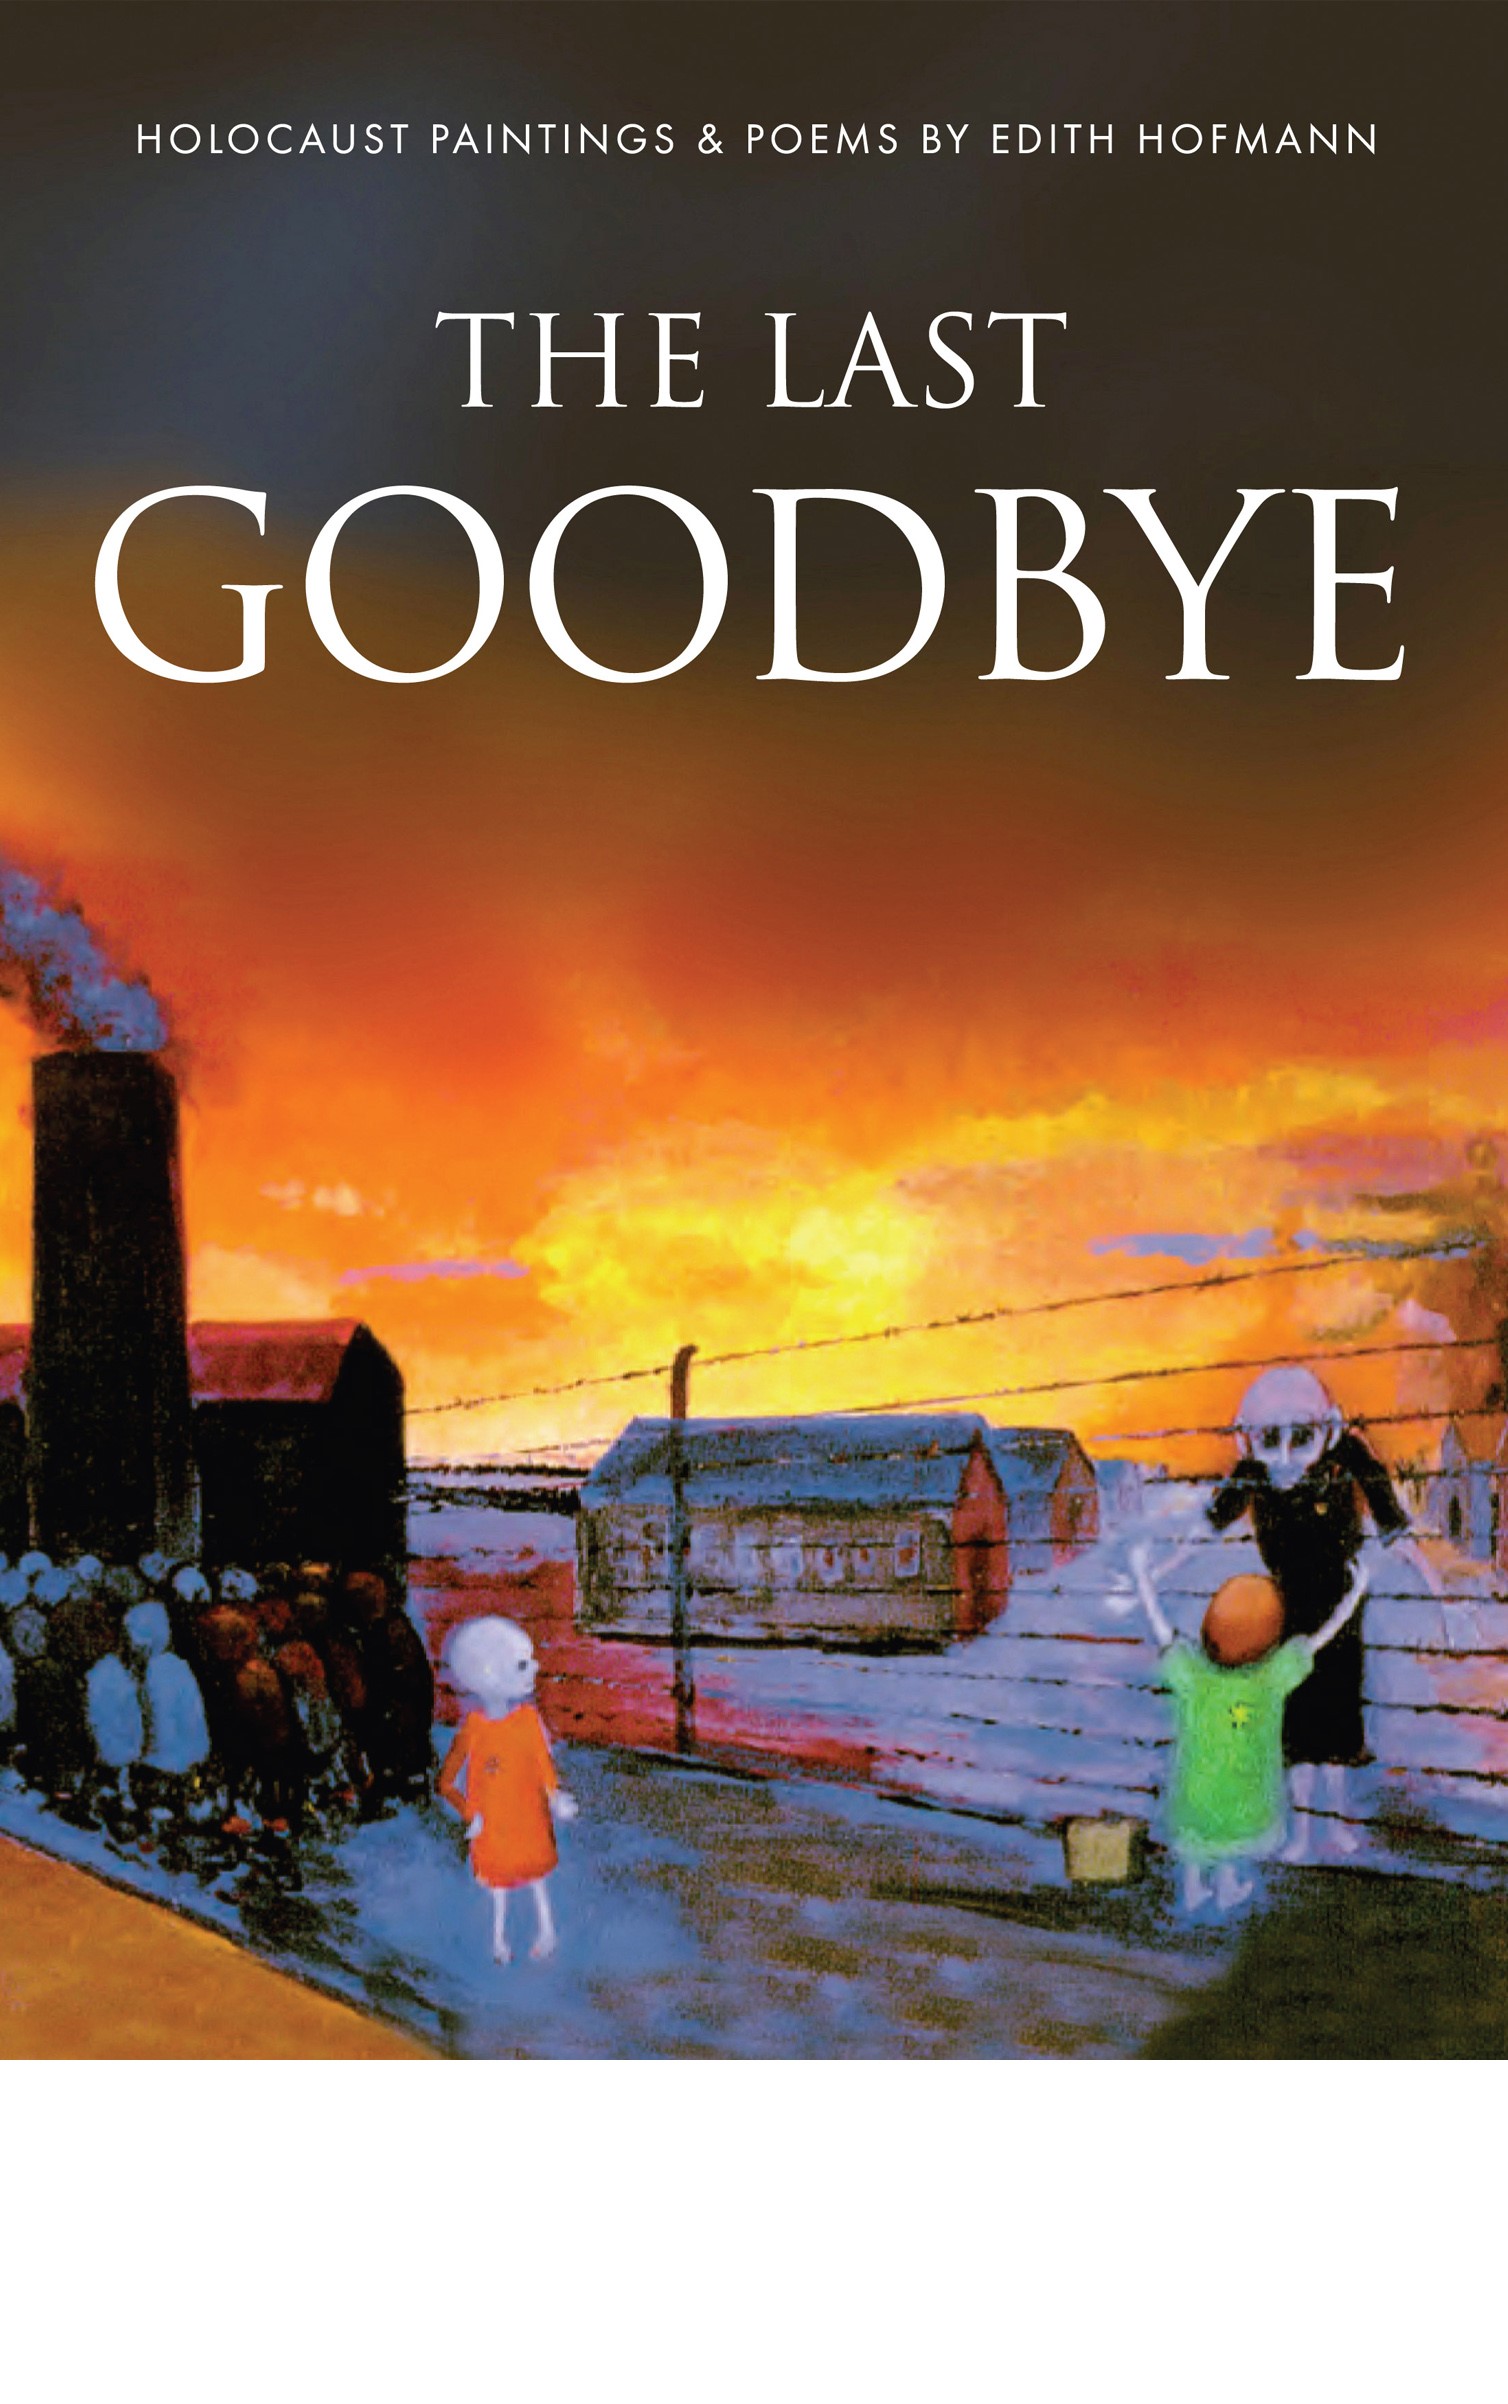 the last time we say goodbye book